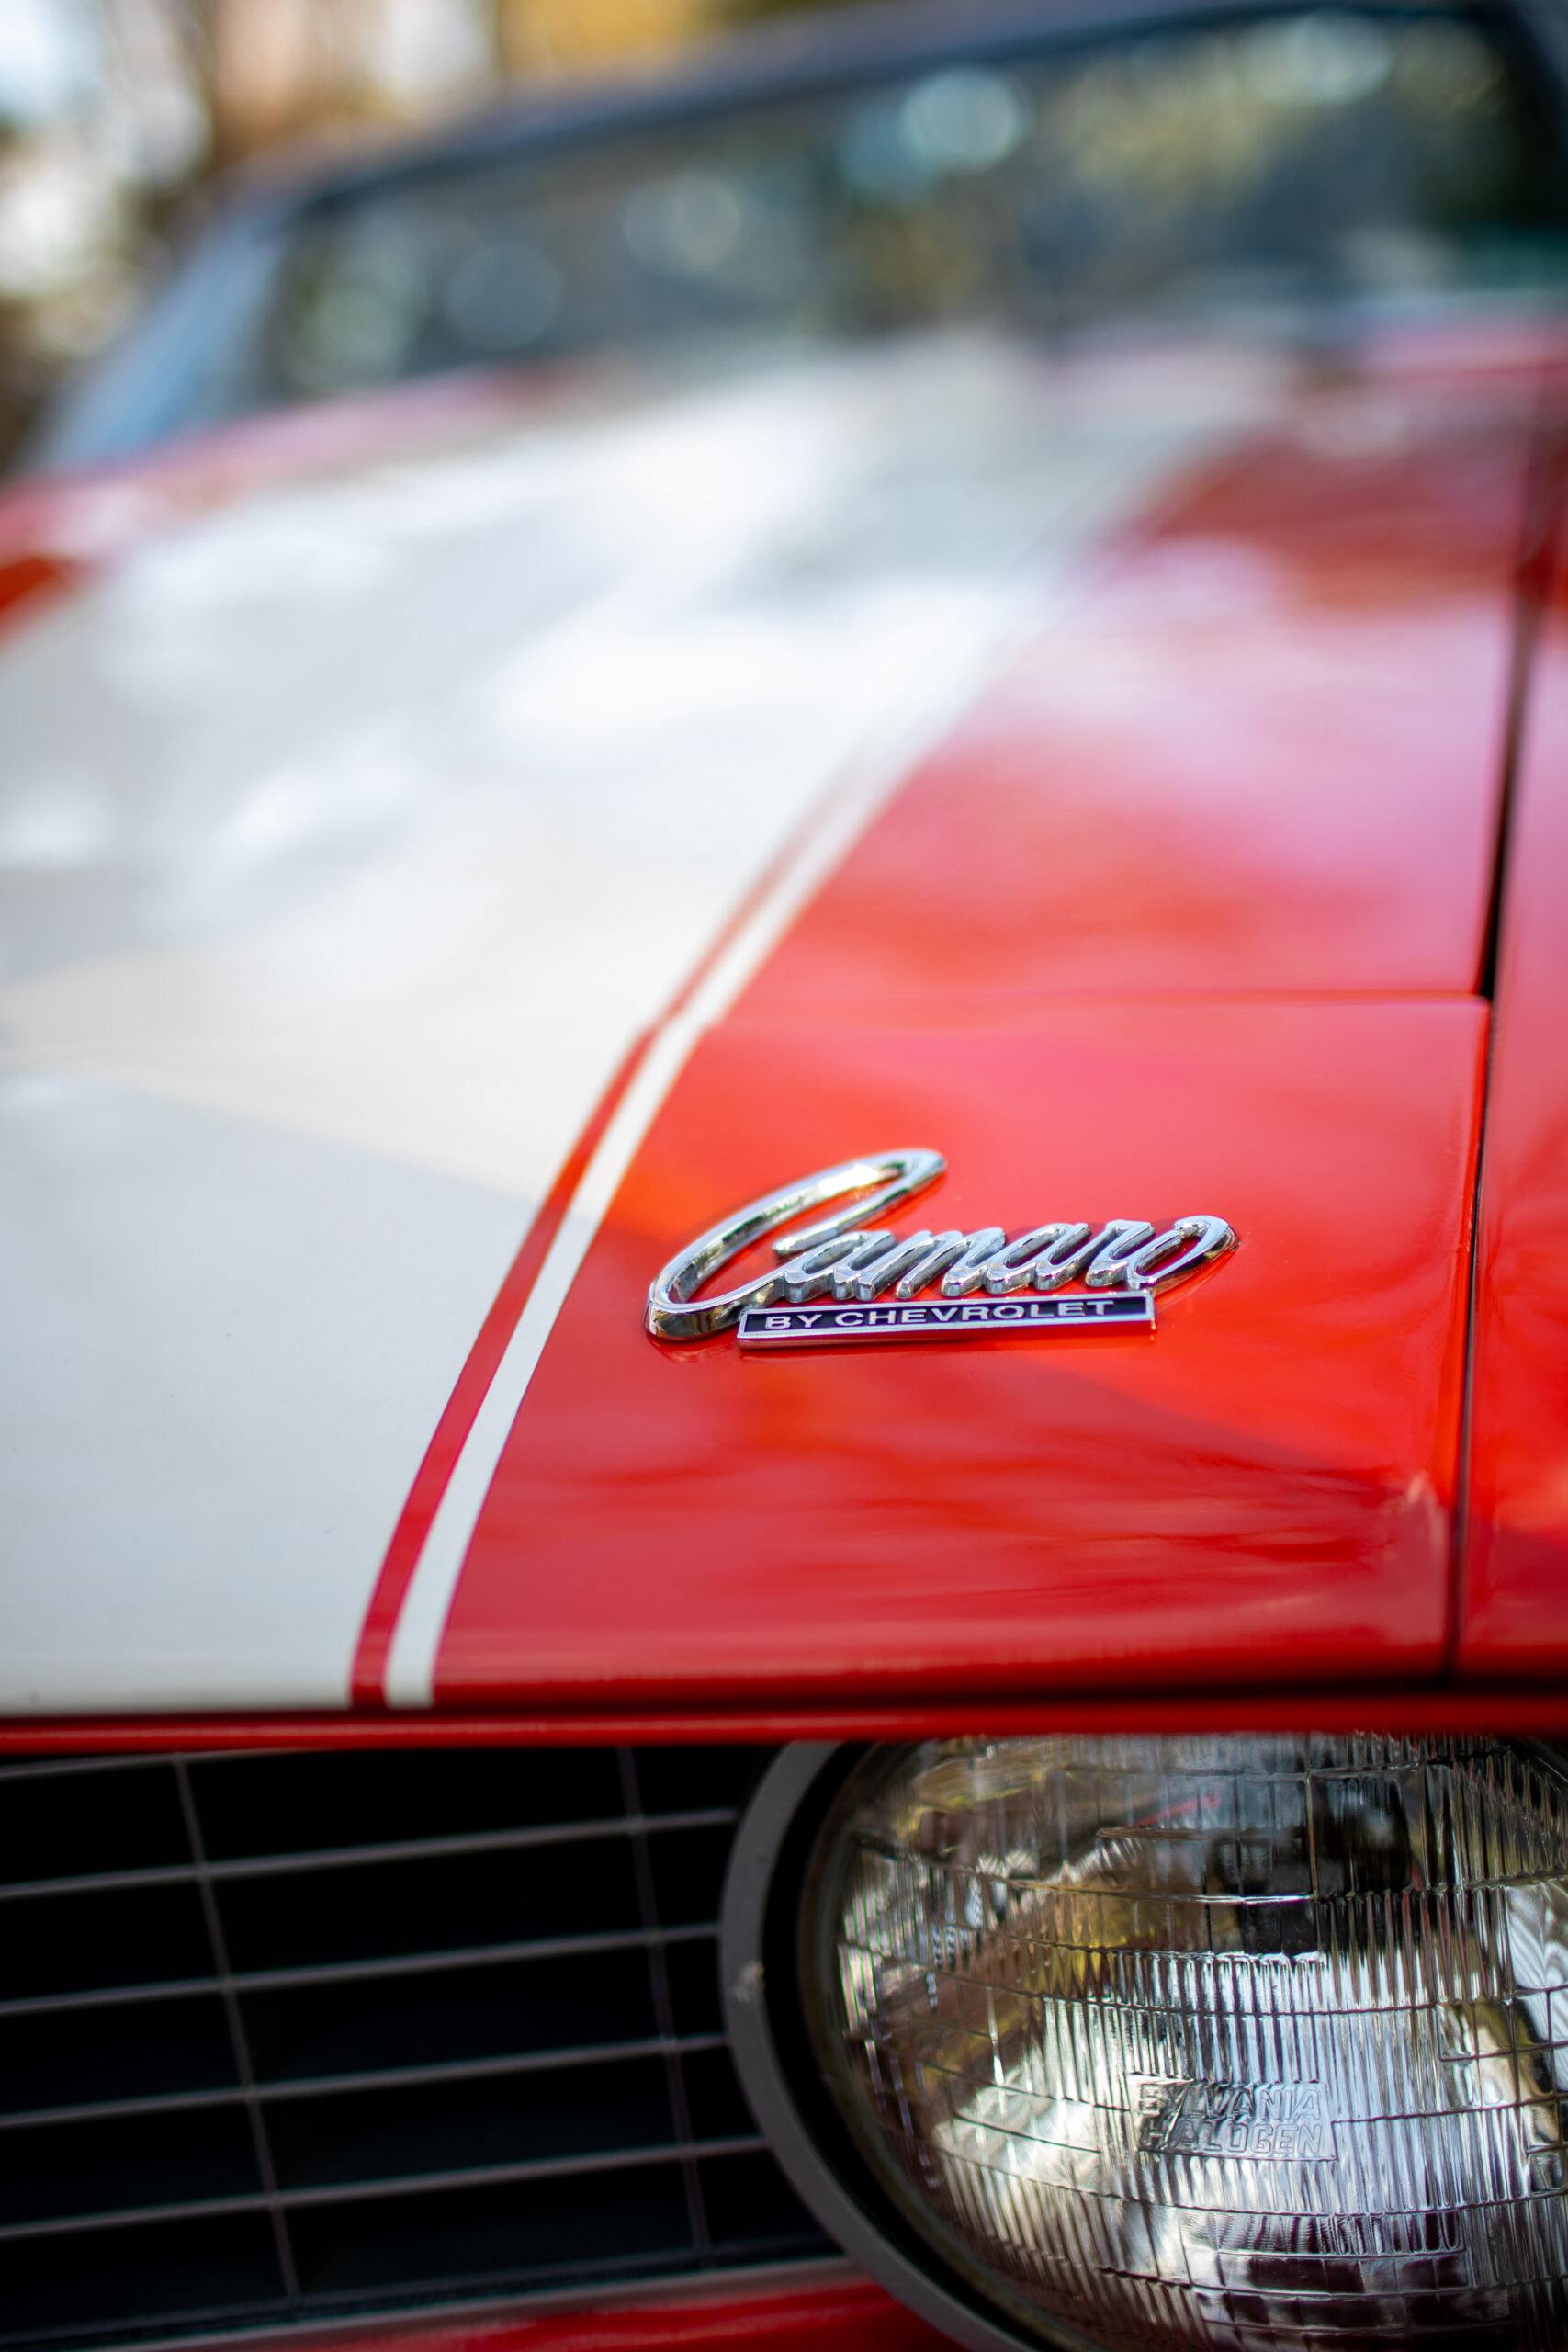 Close-up of a red and white classic Camaro car with a focus on the front emblem and headlight.